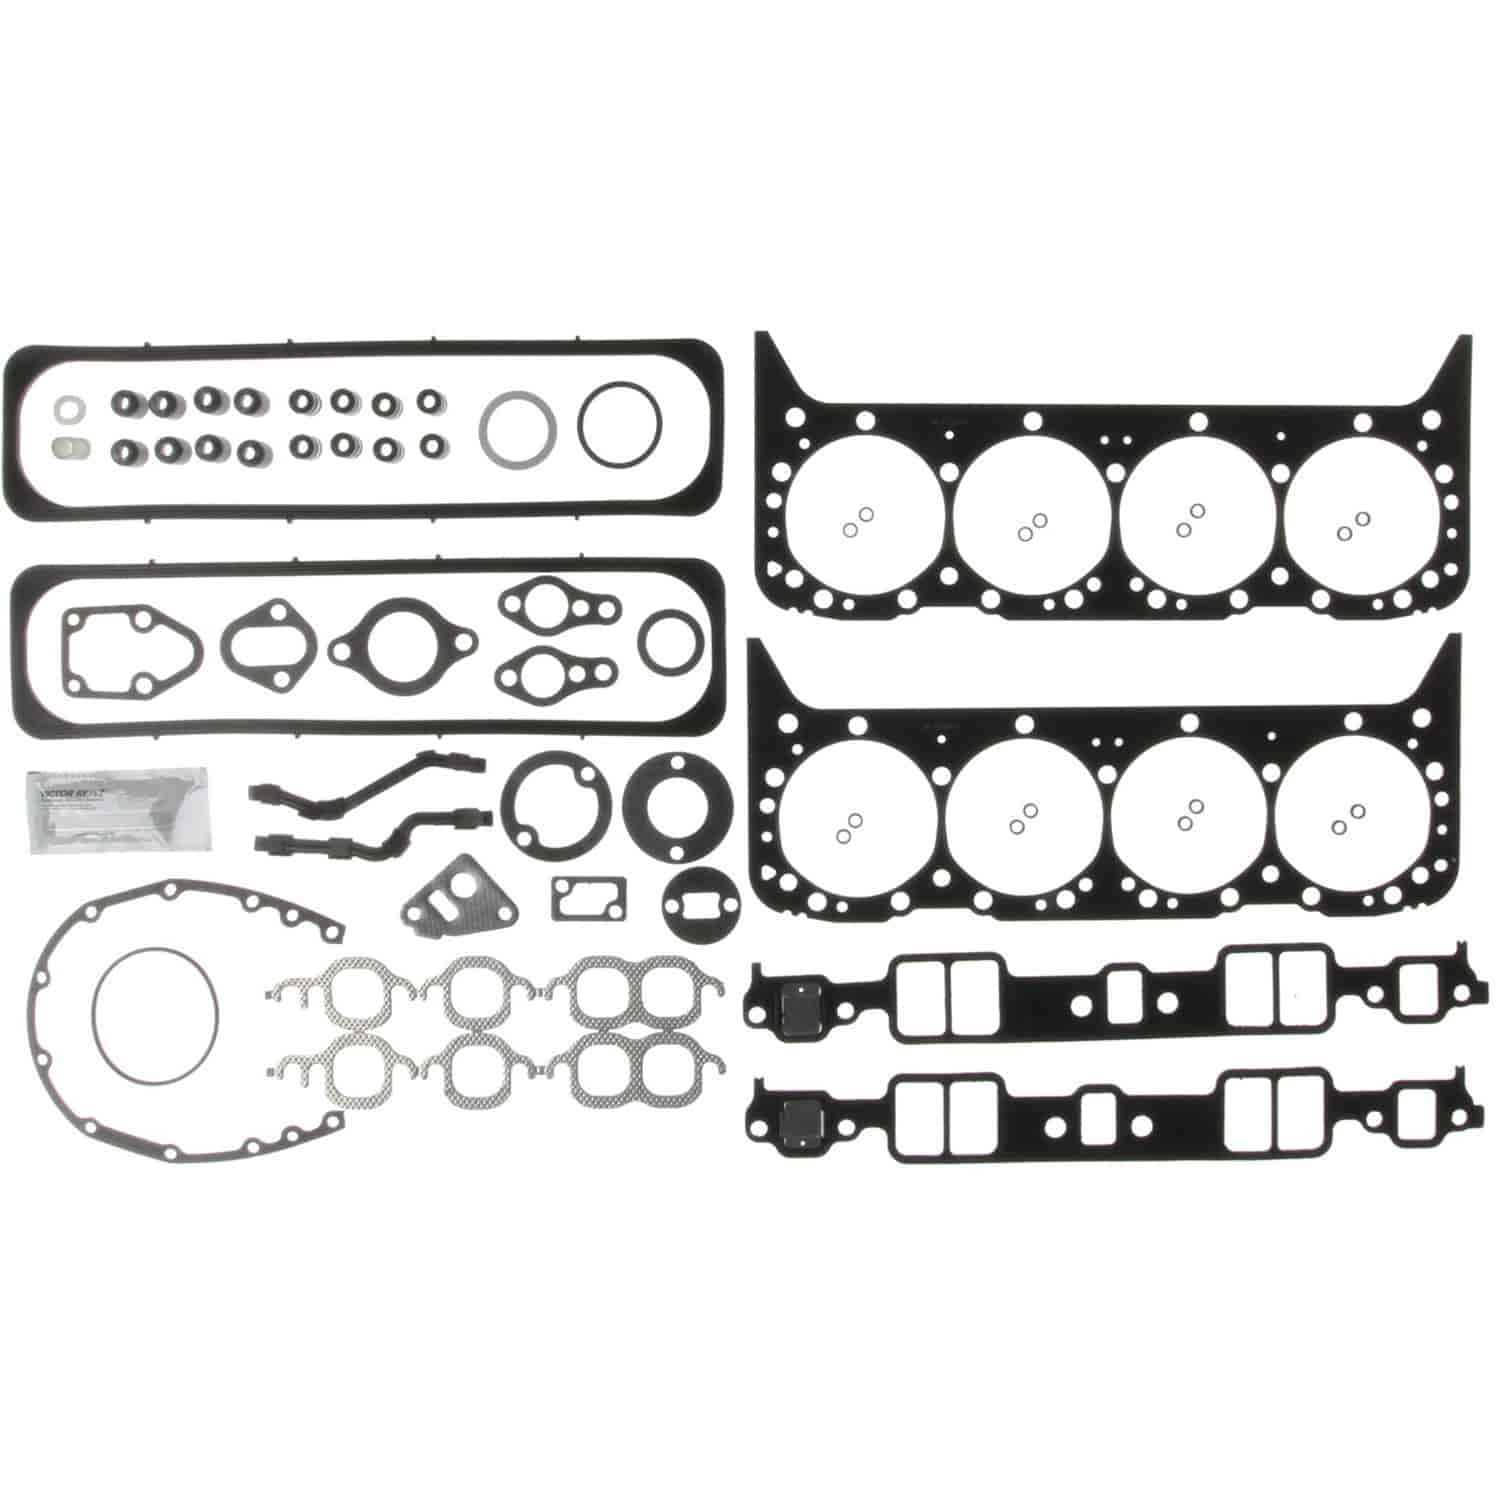 Head Gasket Set 1987-1995 Chevy/GMC Truck Models with Small Block Chevy 350 (5.7L)